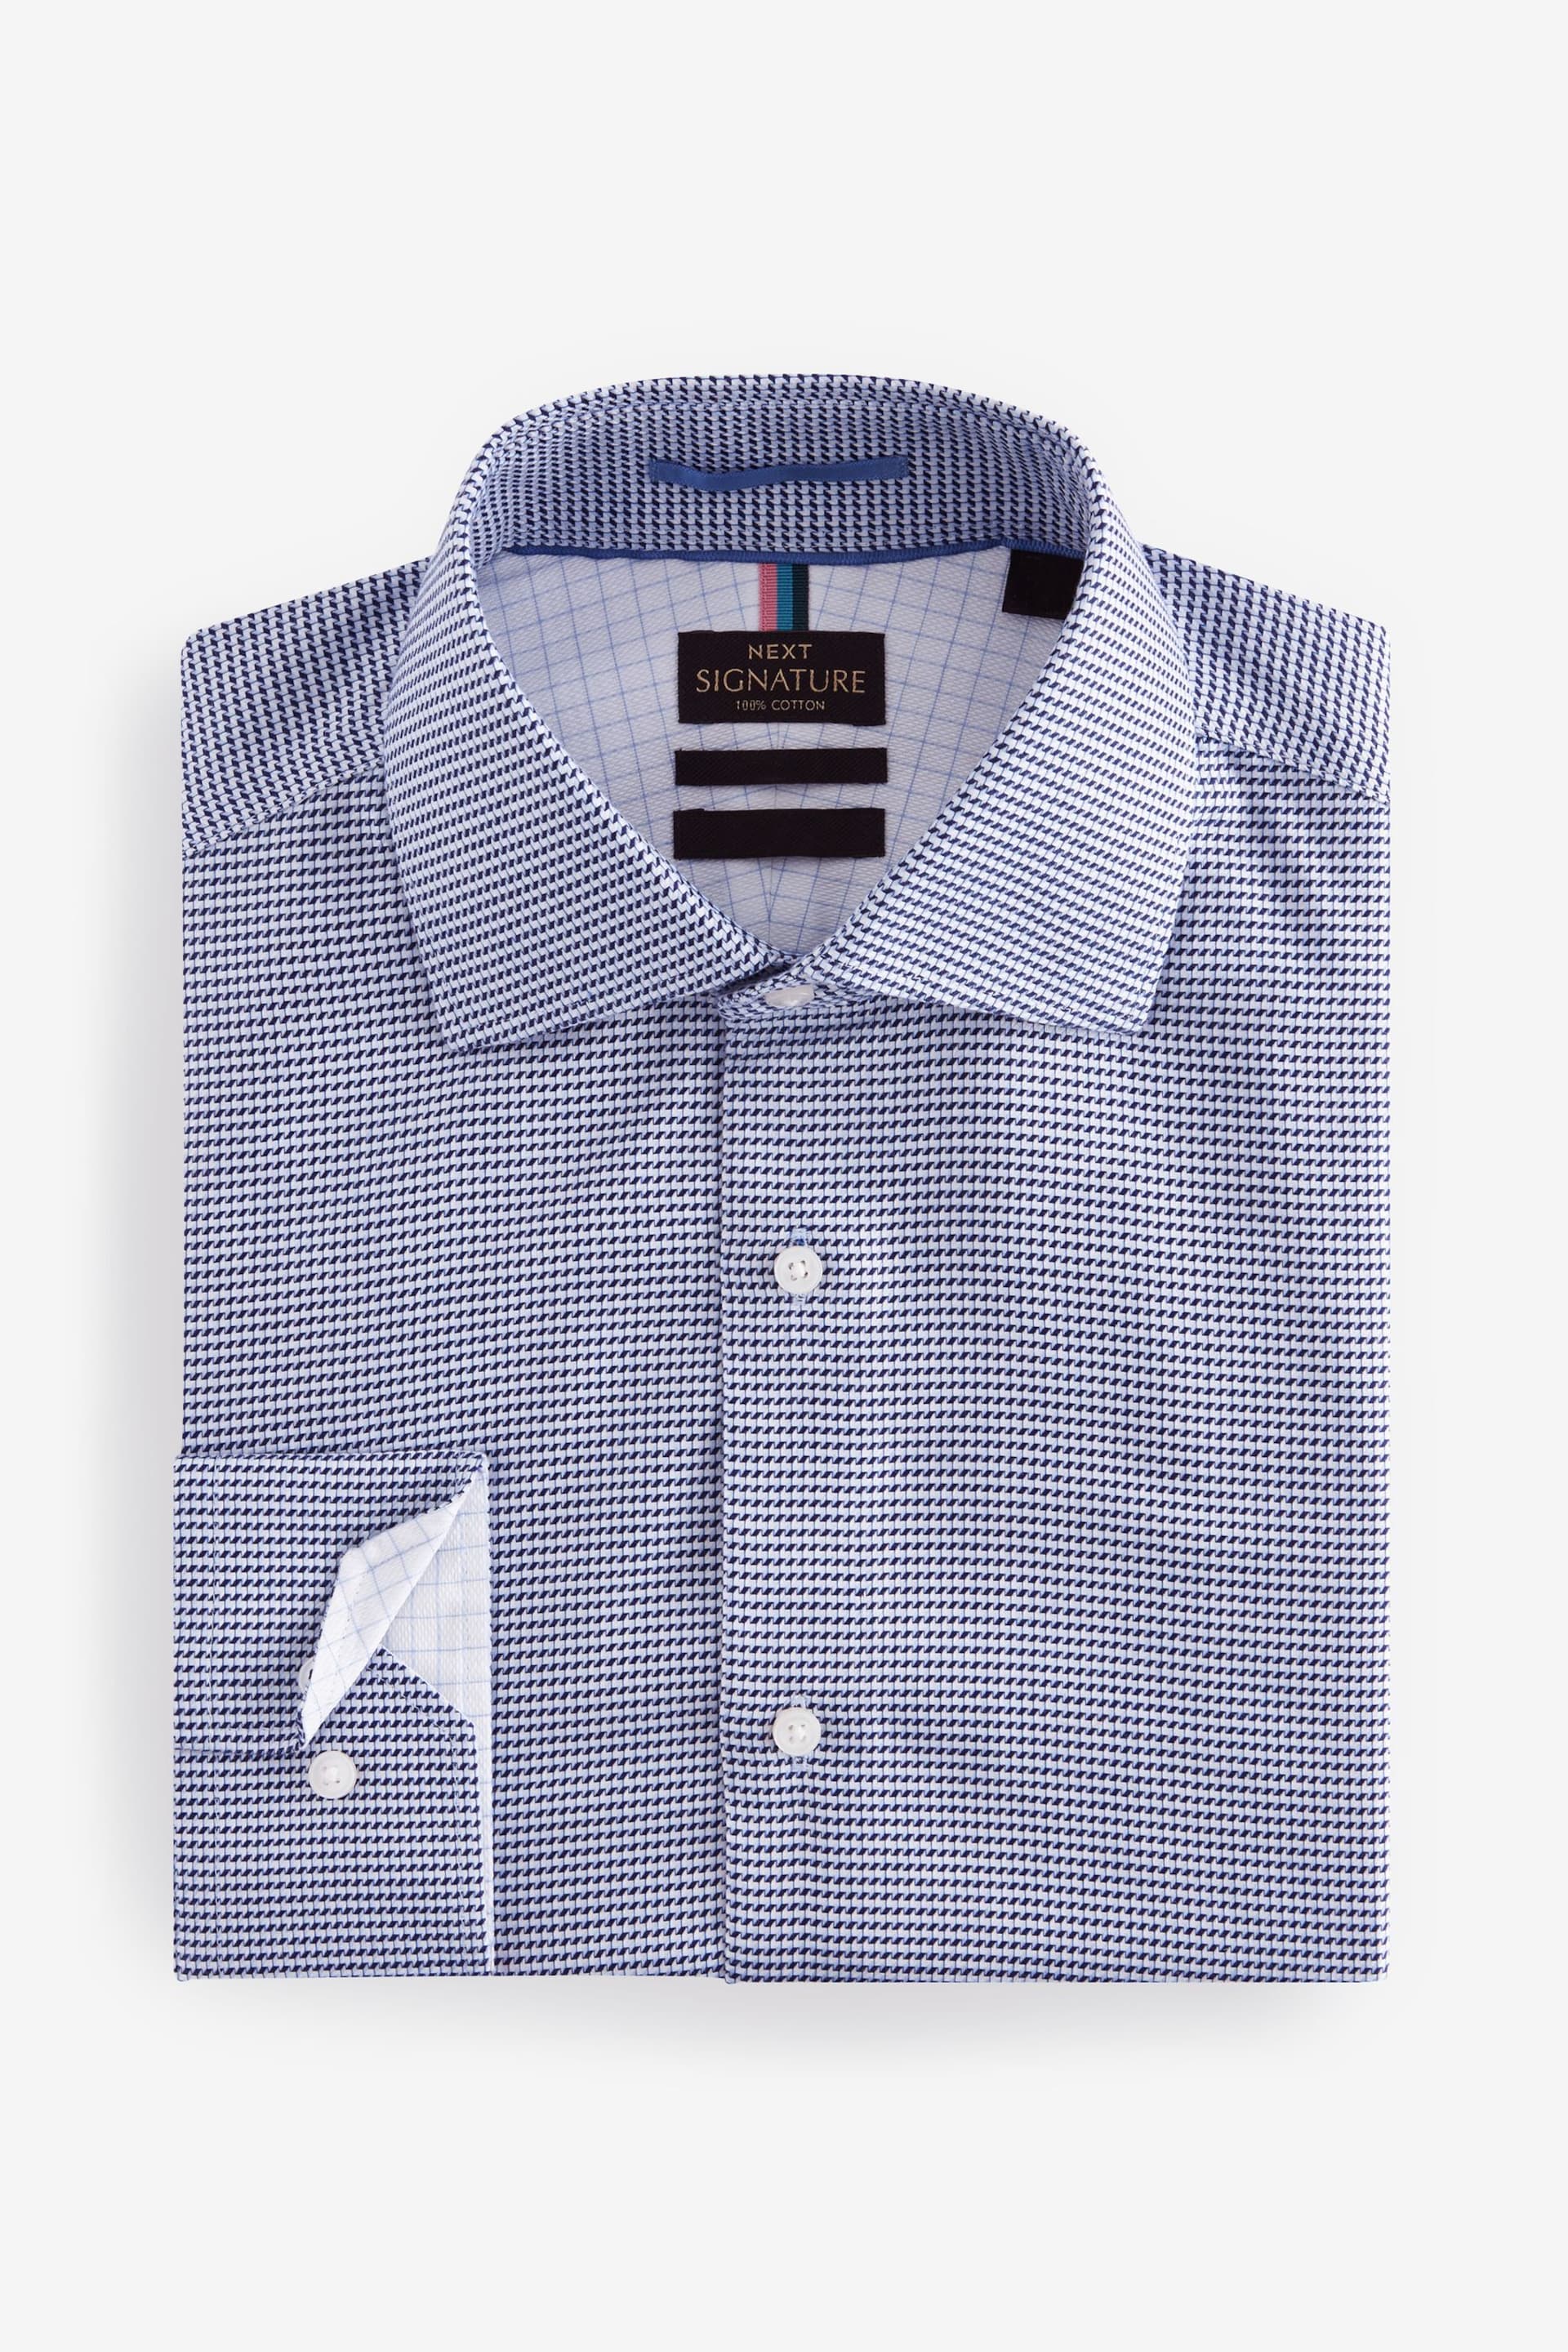 Navy Blue/White Textured Slim Fit Signature Super Non Iron Single Cuff Shirt with Cutaway Collar - Image 6 of 7